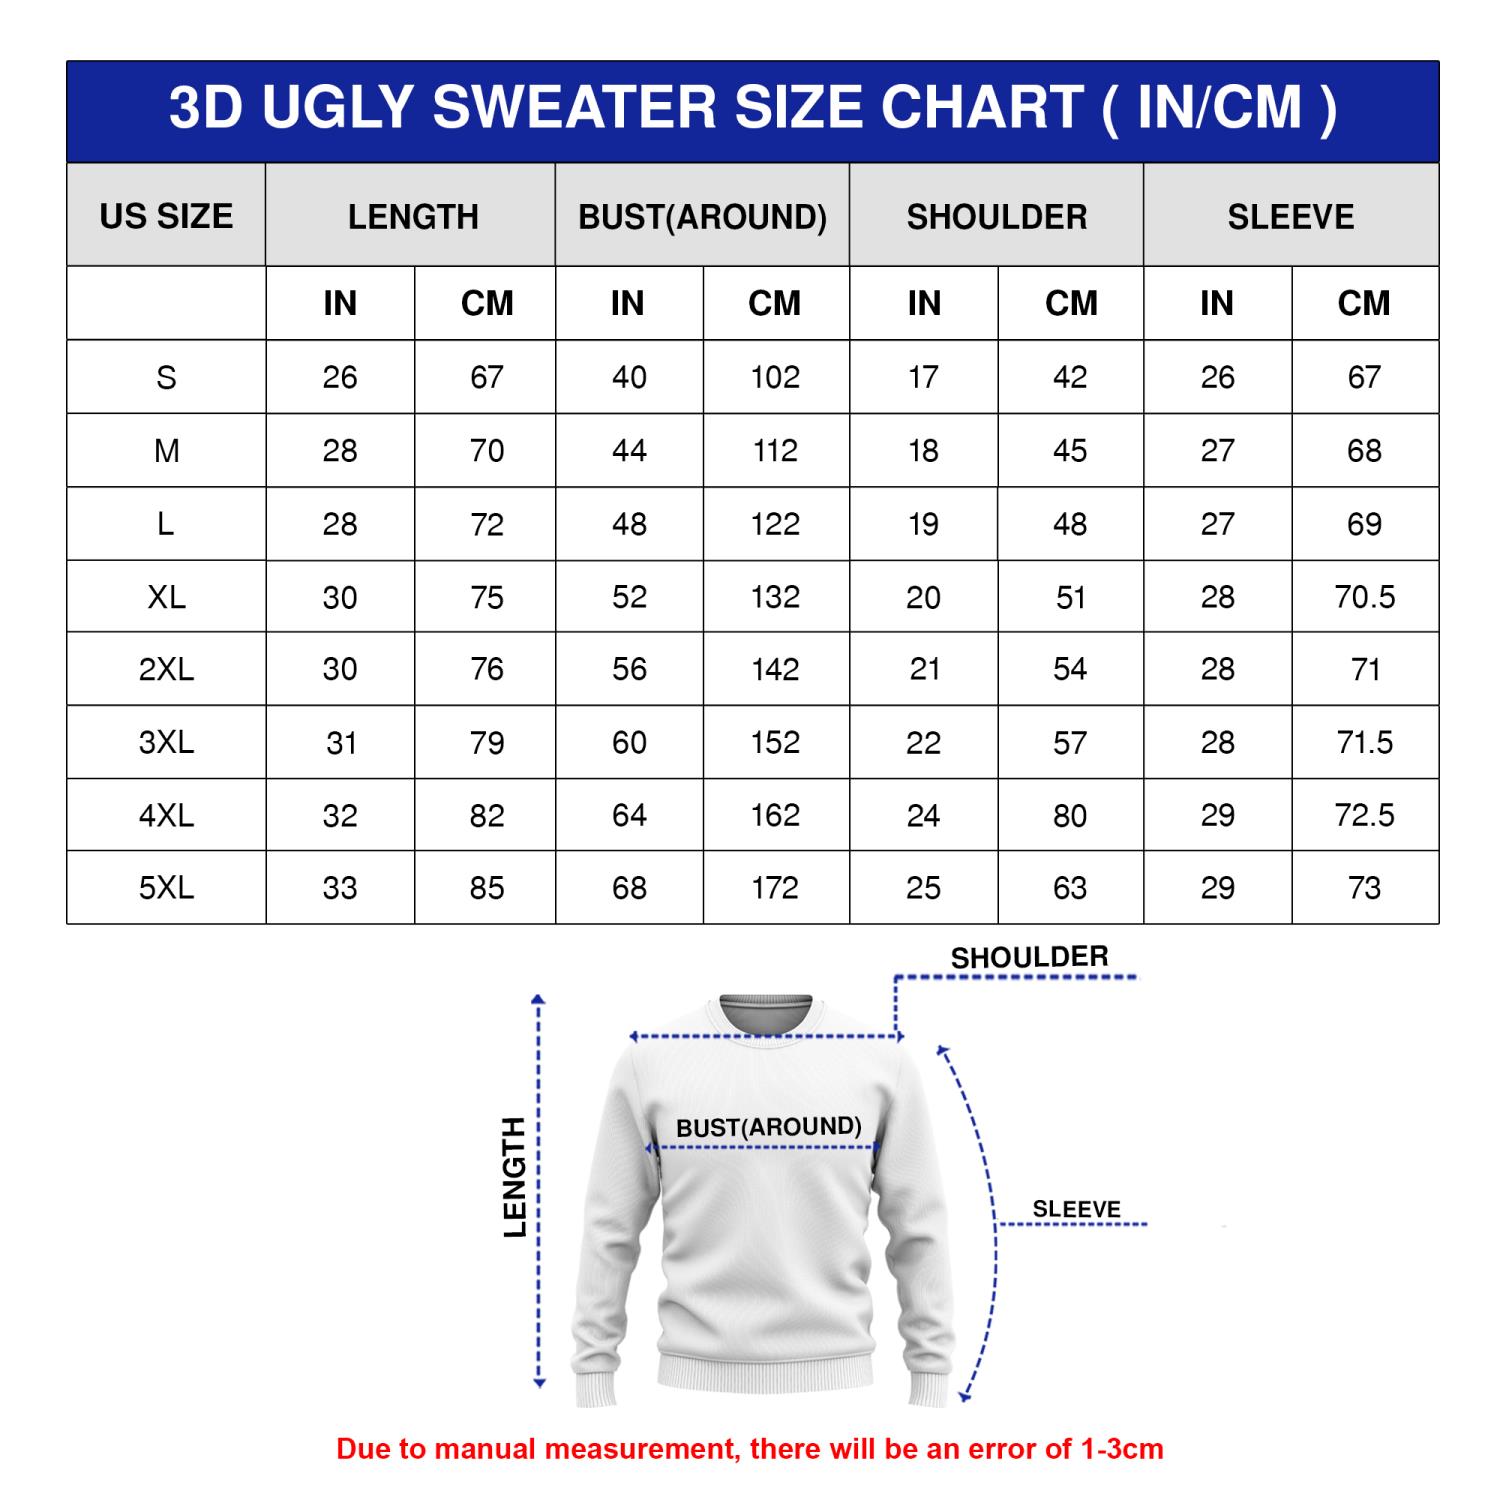 3D Ugly Sweater Size